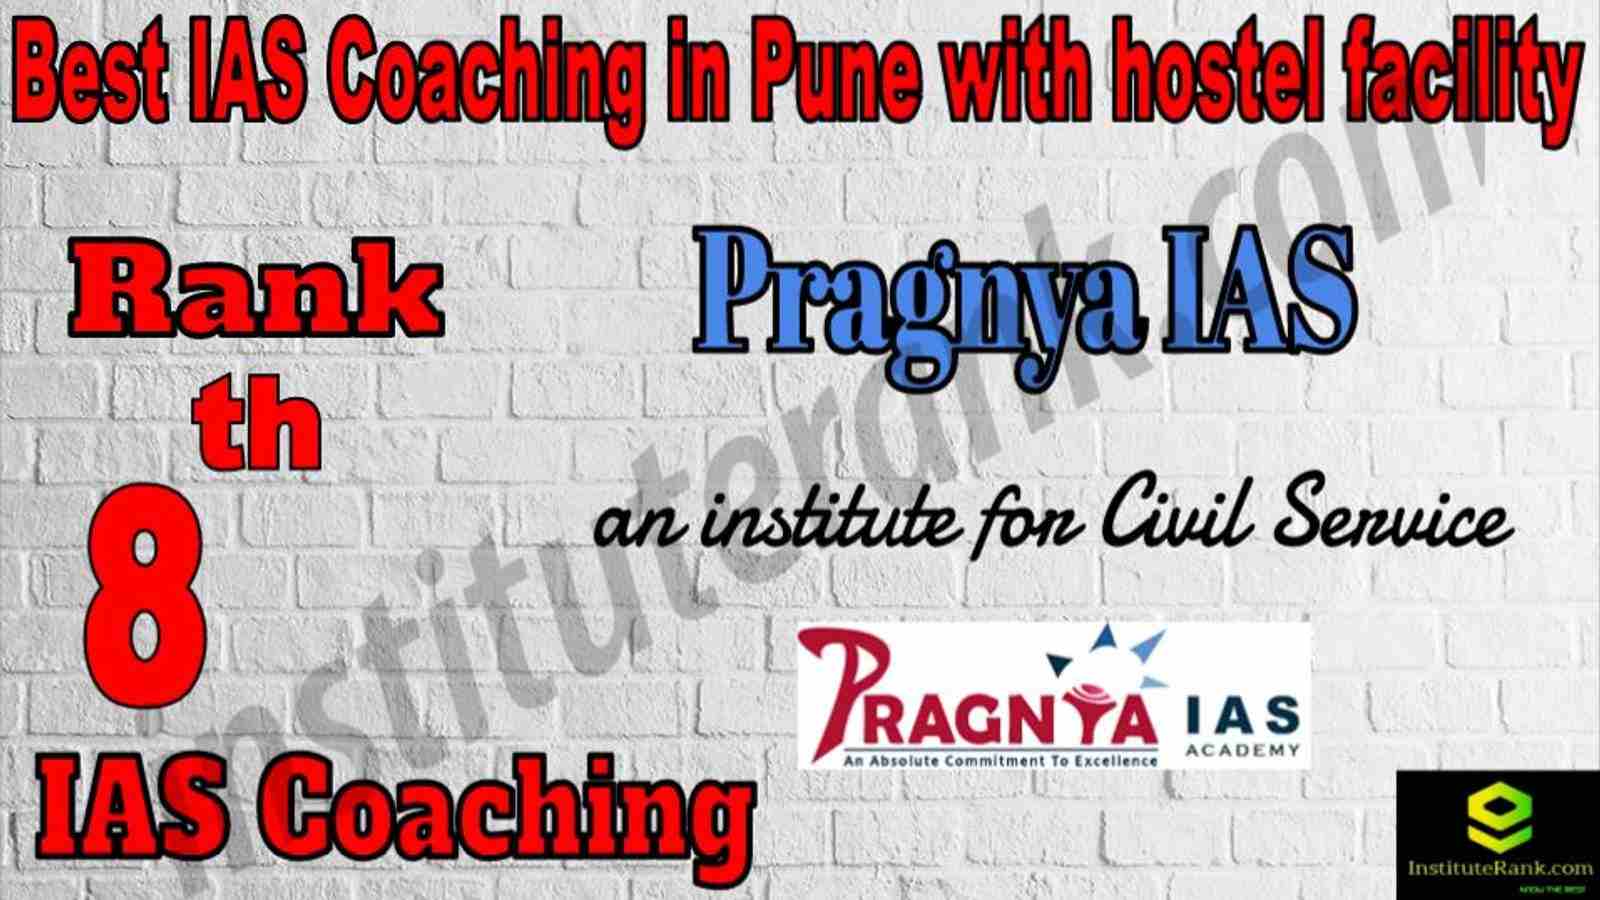 8th Best IAS Coaching in Pune with hostel facility